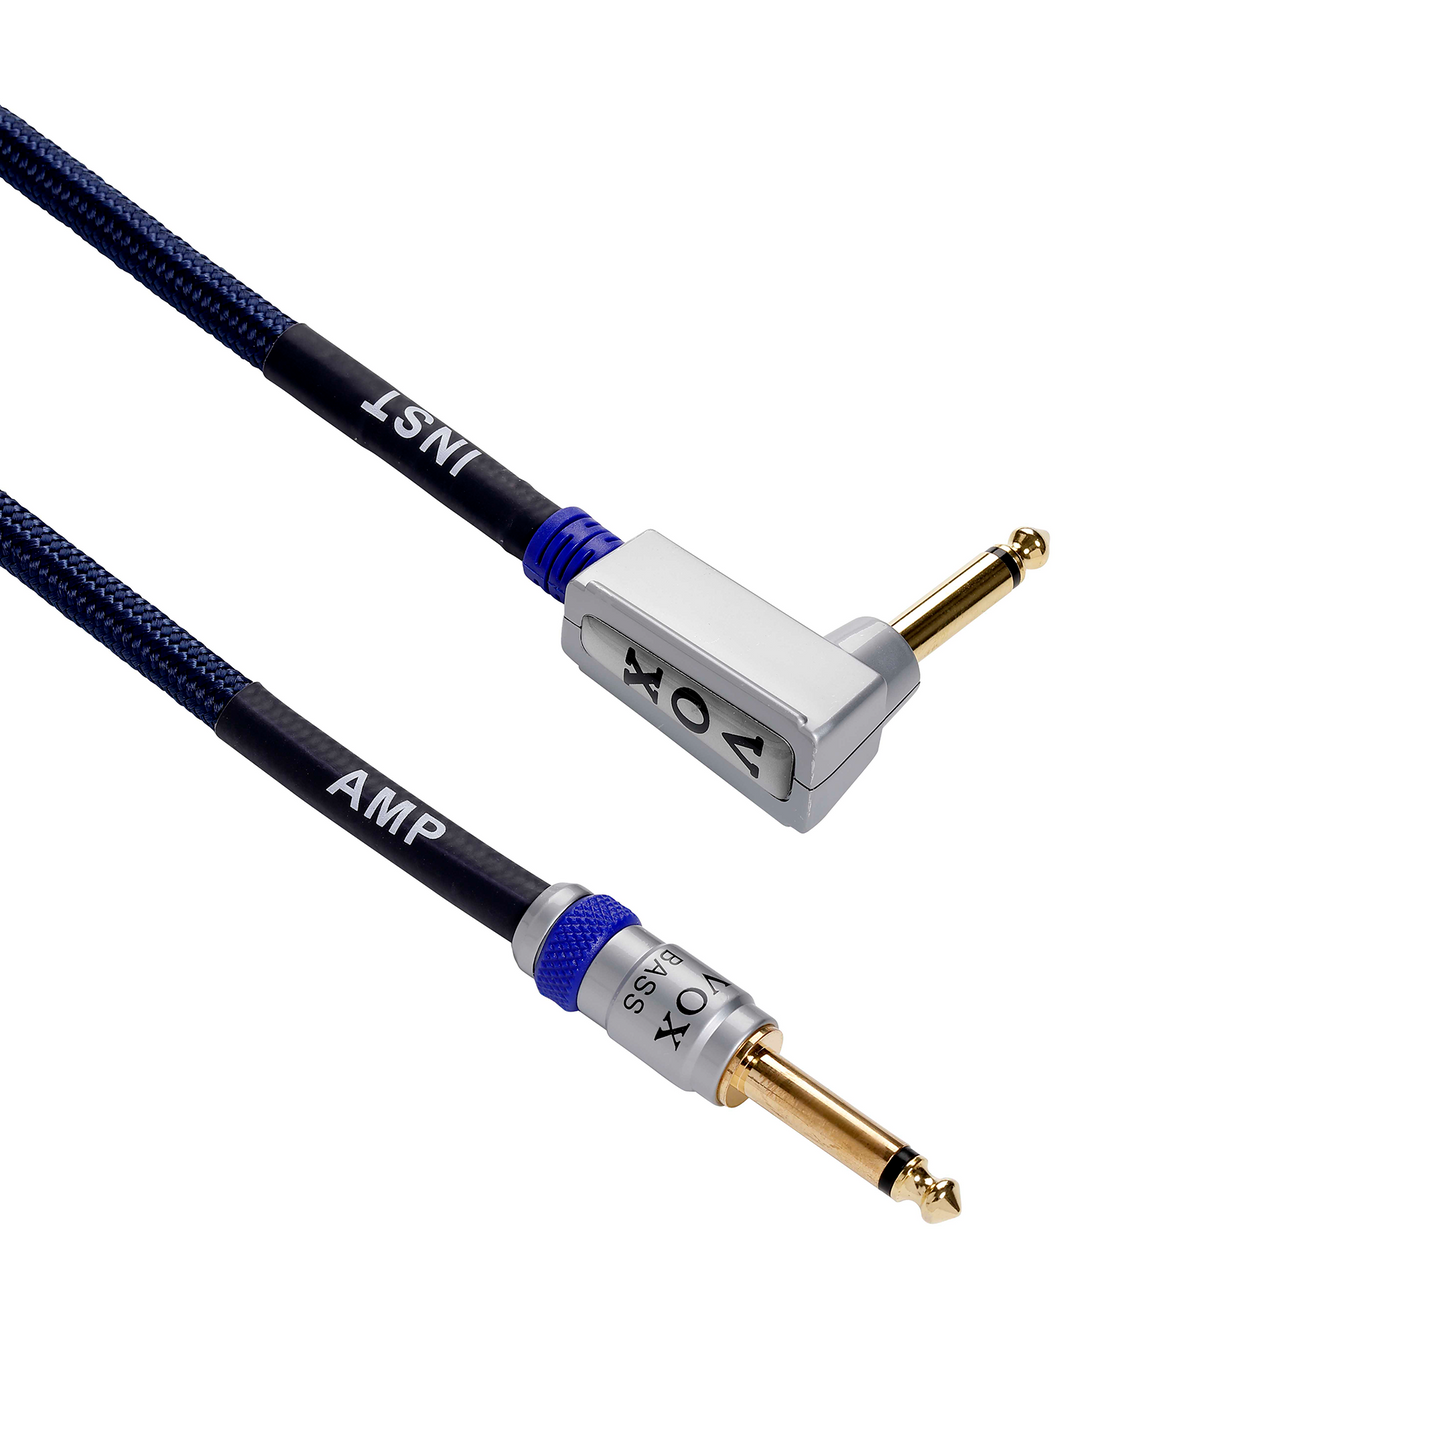 Vox Class A Bass Cable - 13ft (4 metros)